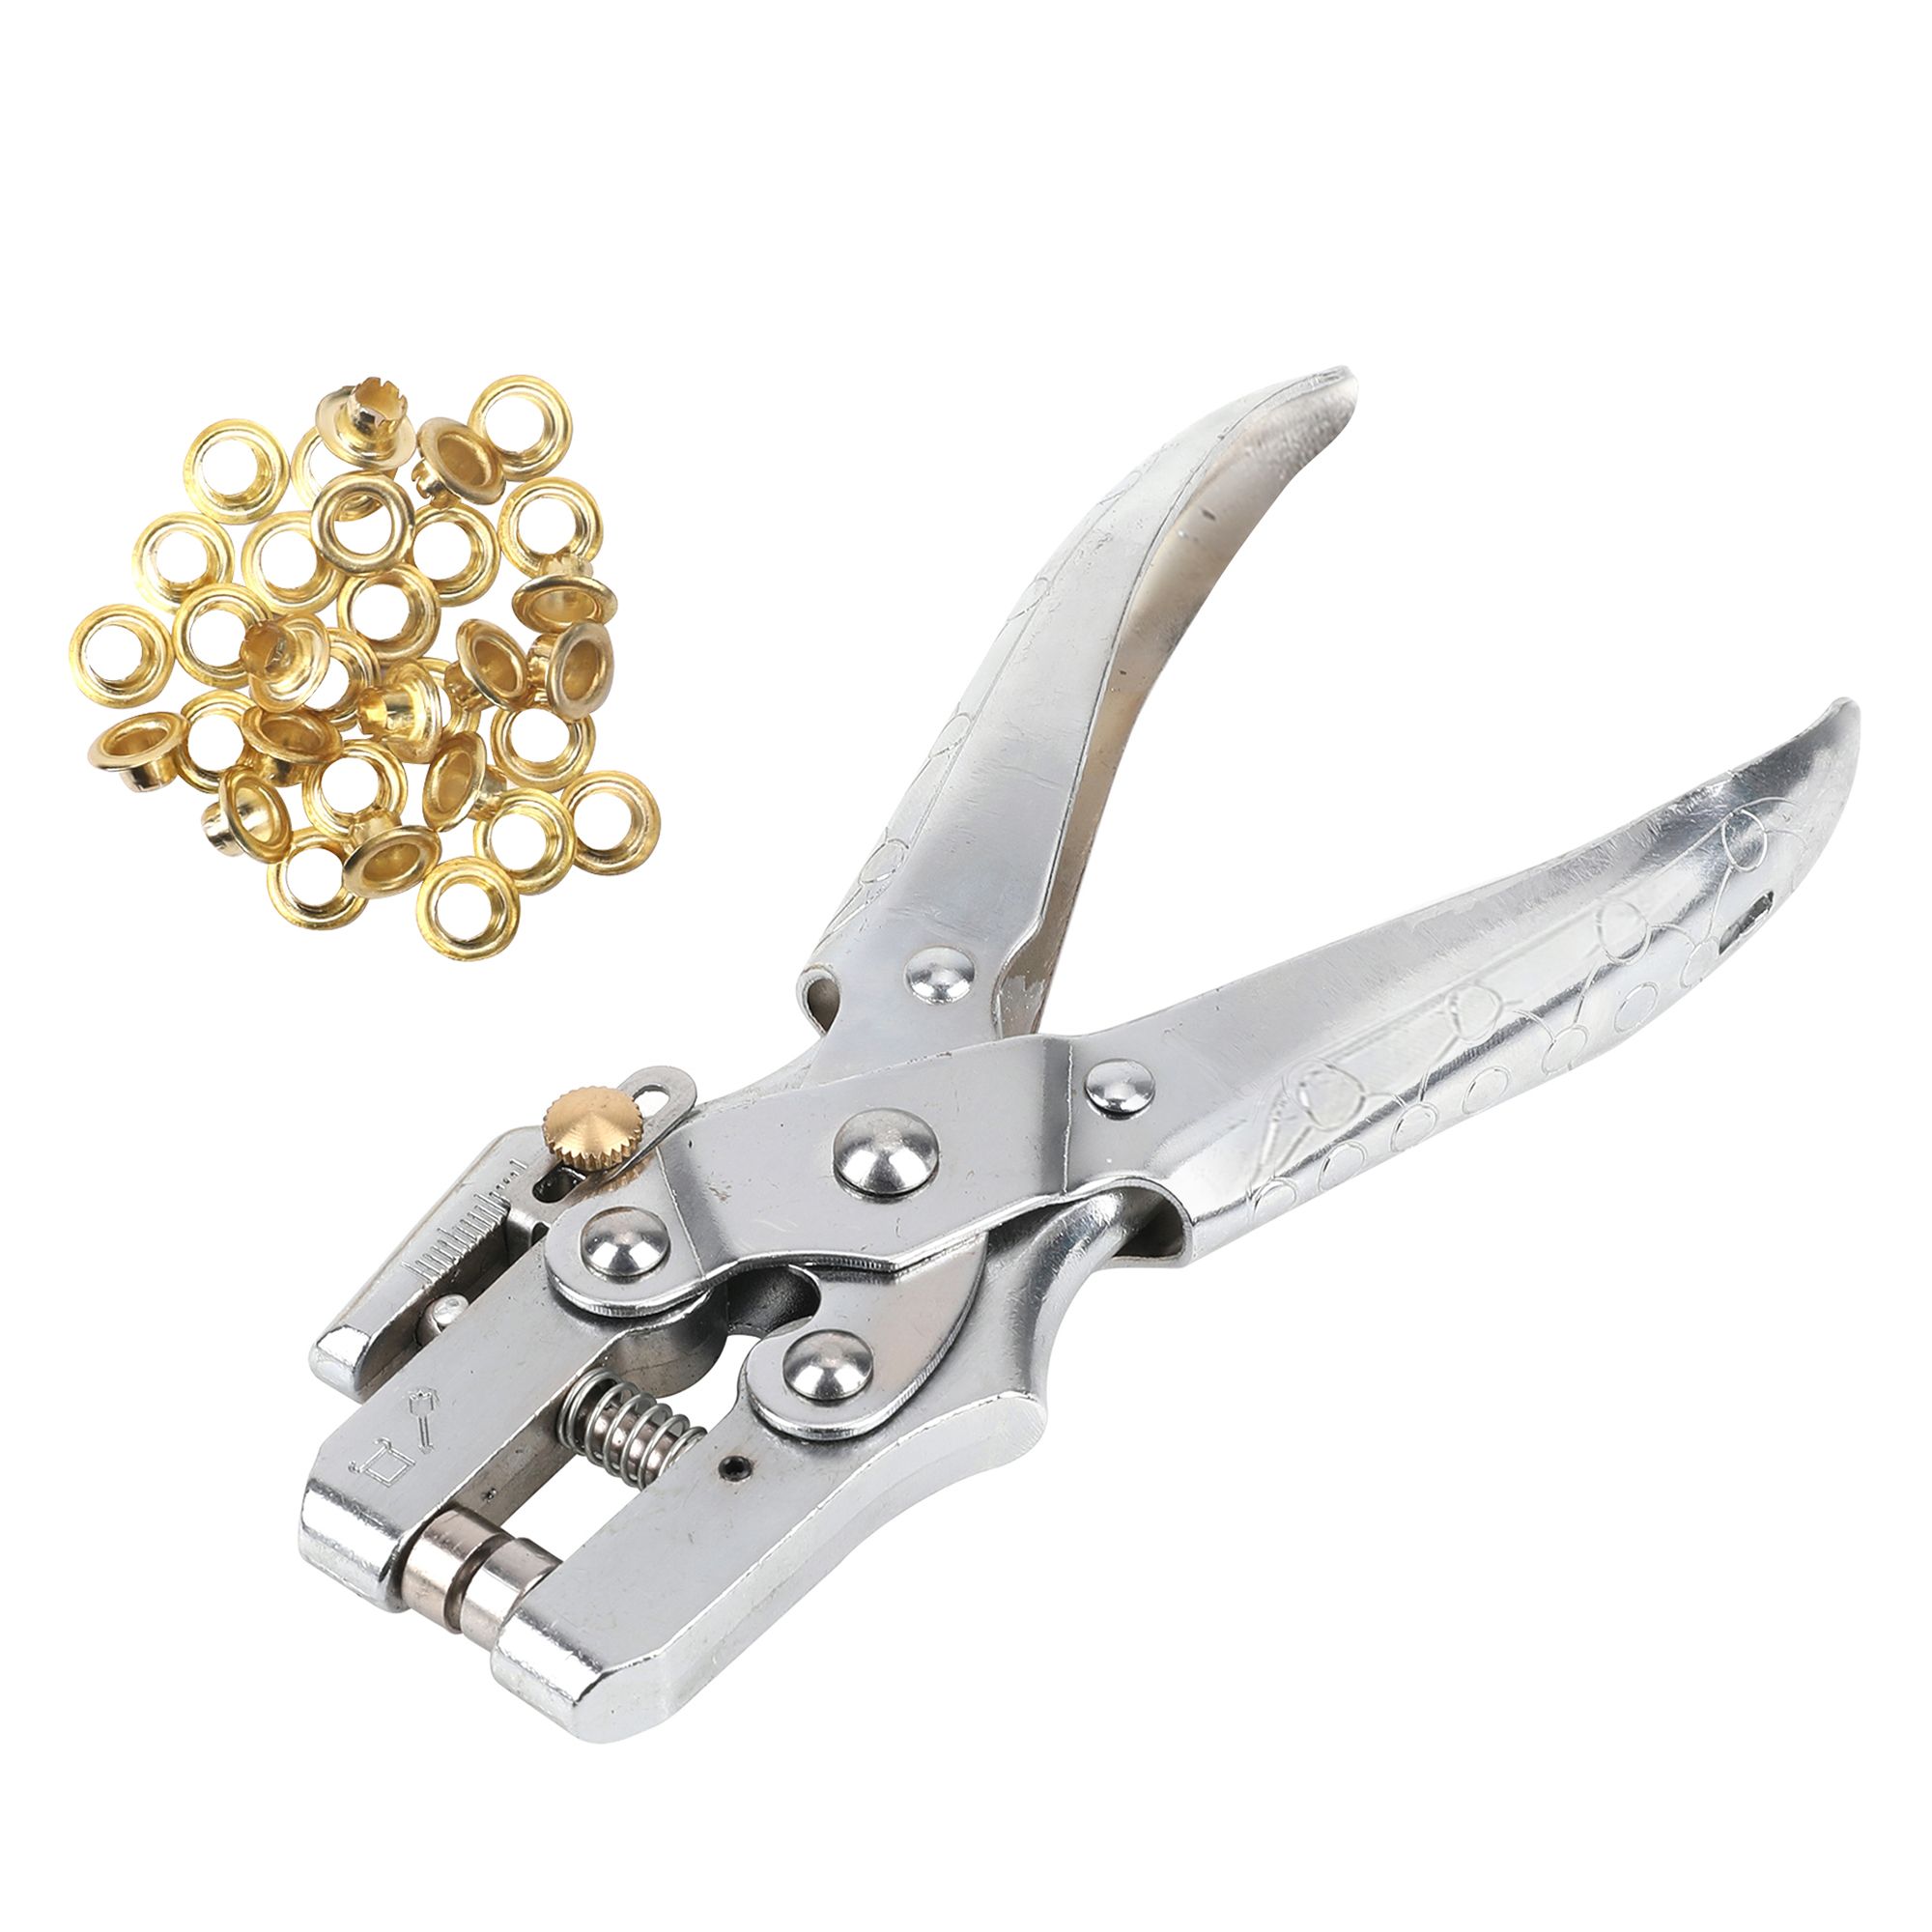 https://media.diy.com/is/image/Kingfisher/168mm-eyelets-washer-pliers~5059340006338_01c?$MOB_PREV$&$width=190&$height=190